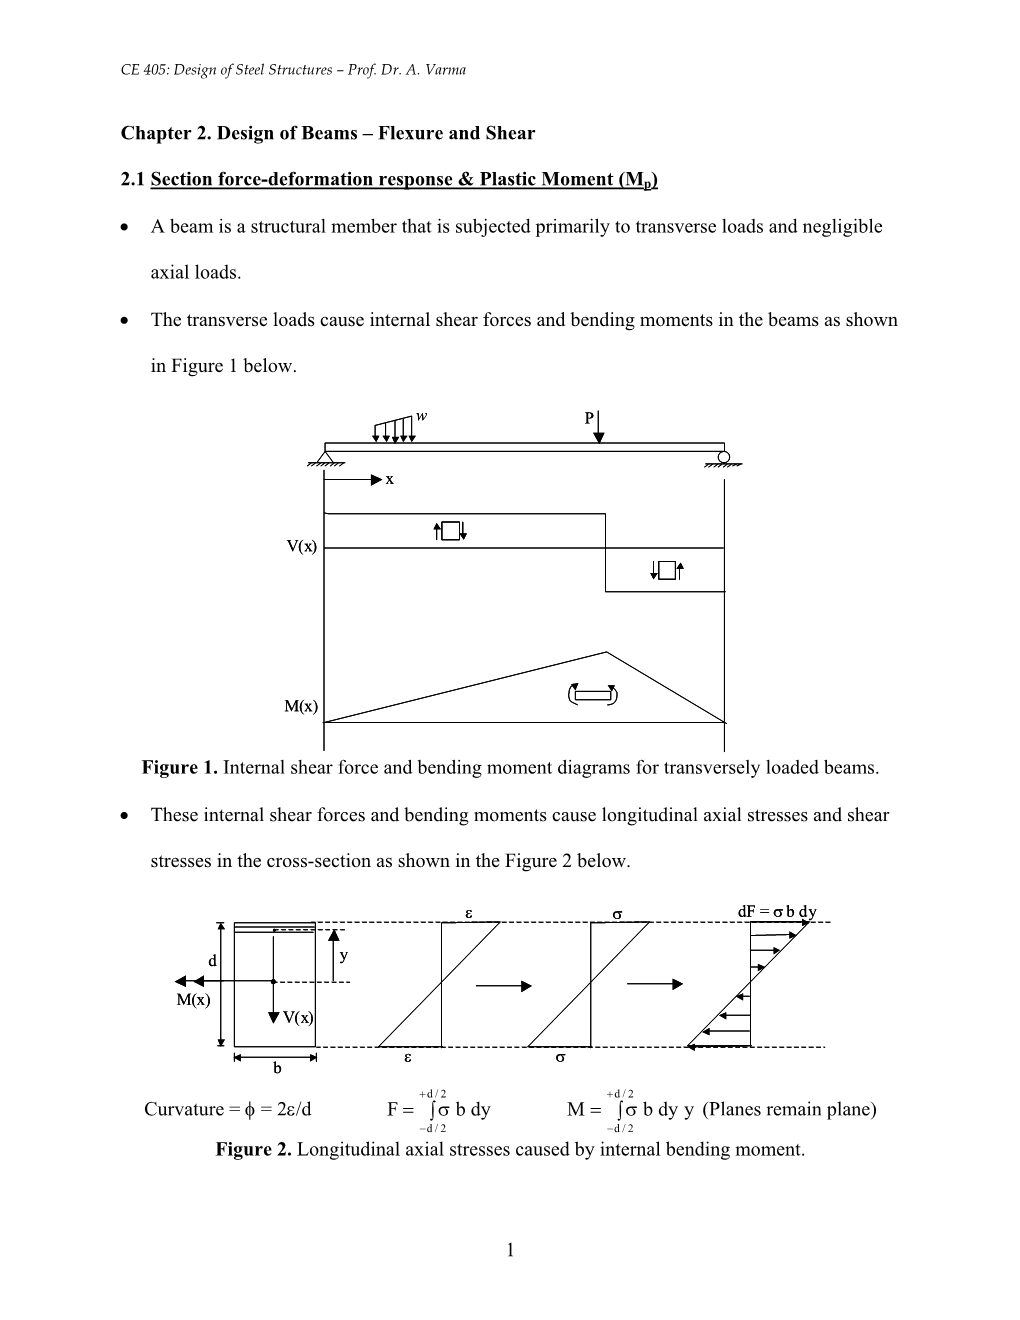 Chapter 2. Design of Beams – Flexure and Shear 2.1 Section Force